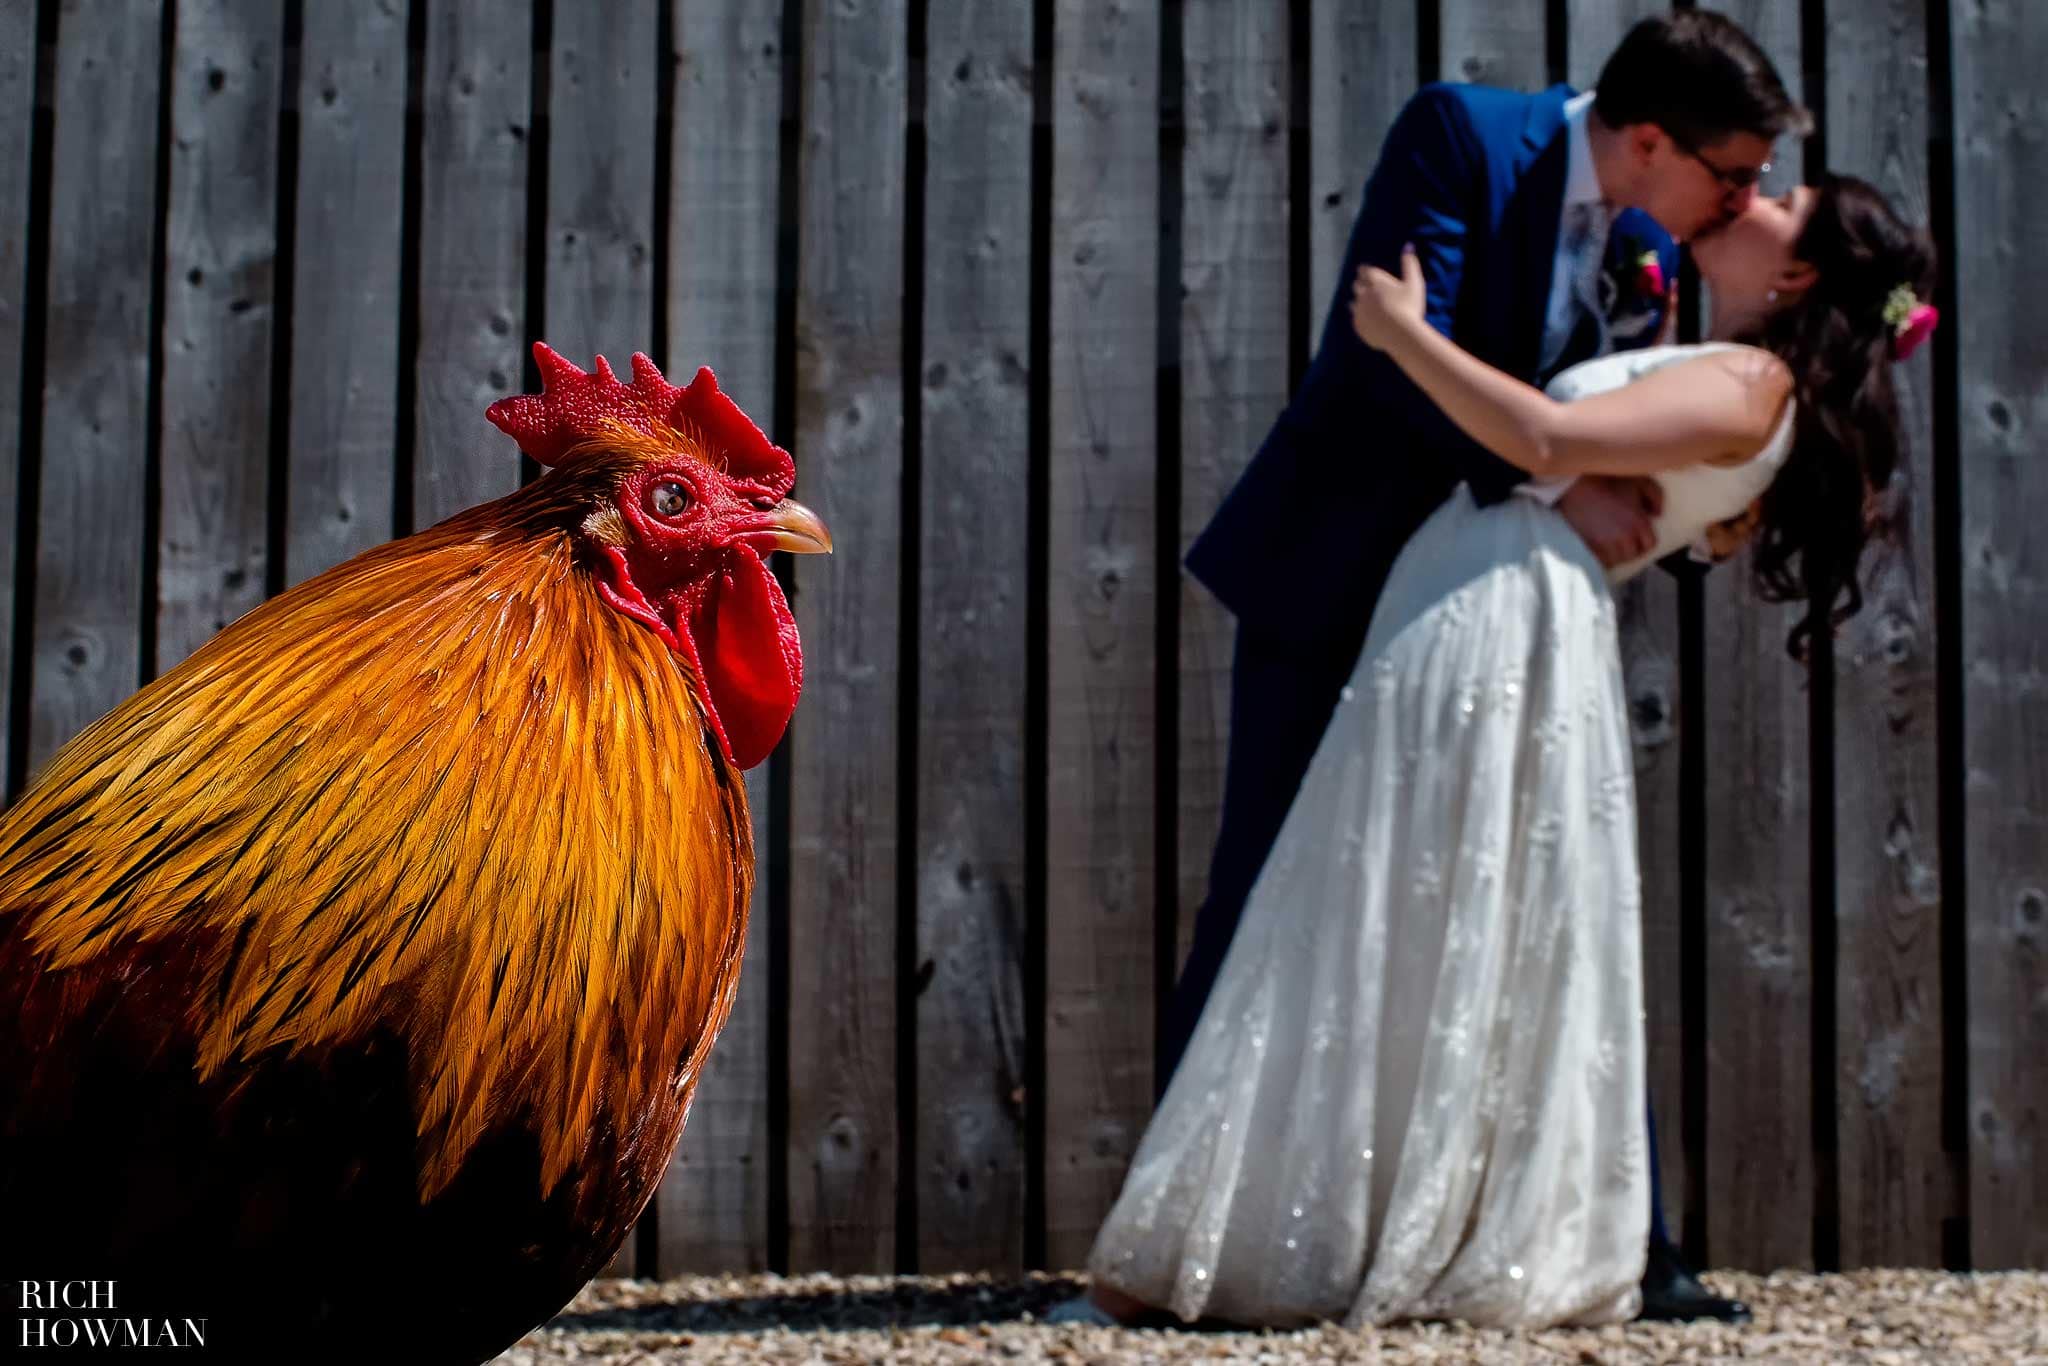 Farm Wedding photography in Gloucestershire. A chicker is pictured with the bride and groom at their family farm wedding